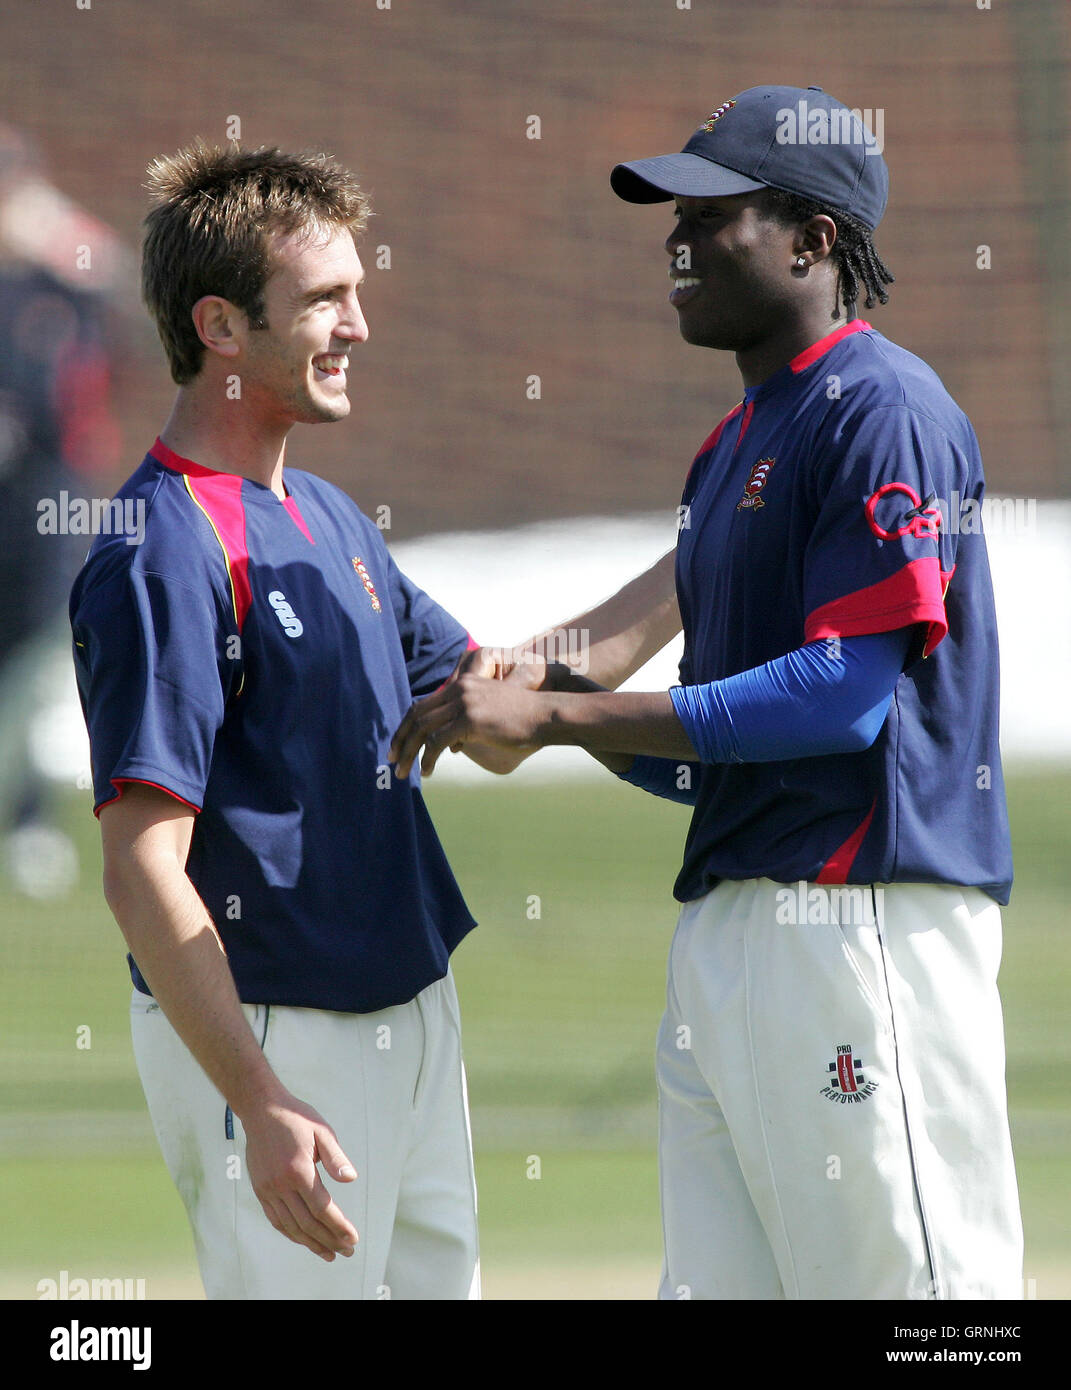 Trialist Steve Clark congratulates Maurice Chambers on his catch that dismissed Surrey batsman Mark Butcher - Essex CCC vs Surrey CCC - Friendly Match at Ford County Ground, Chelmsford, Essex - 05/04/07 Stock Photo